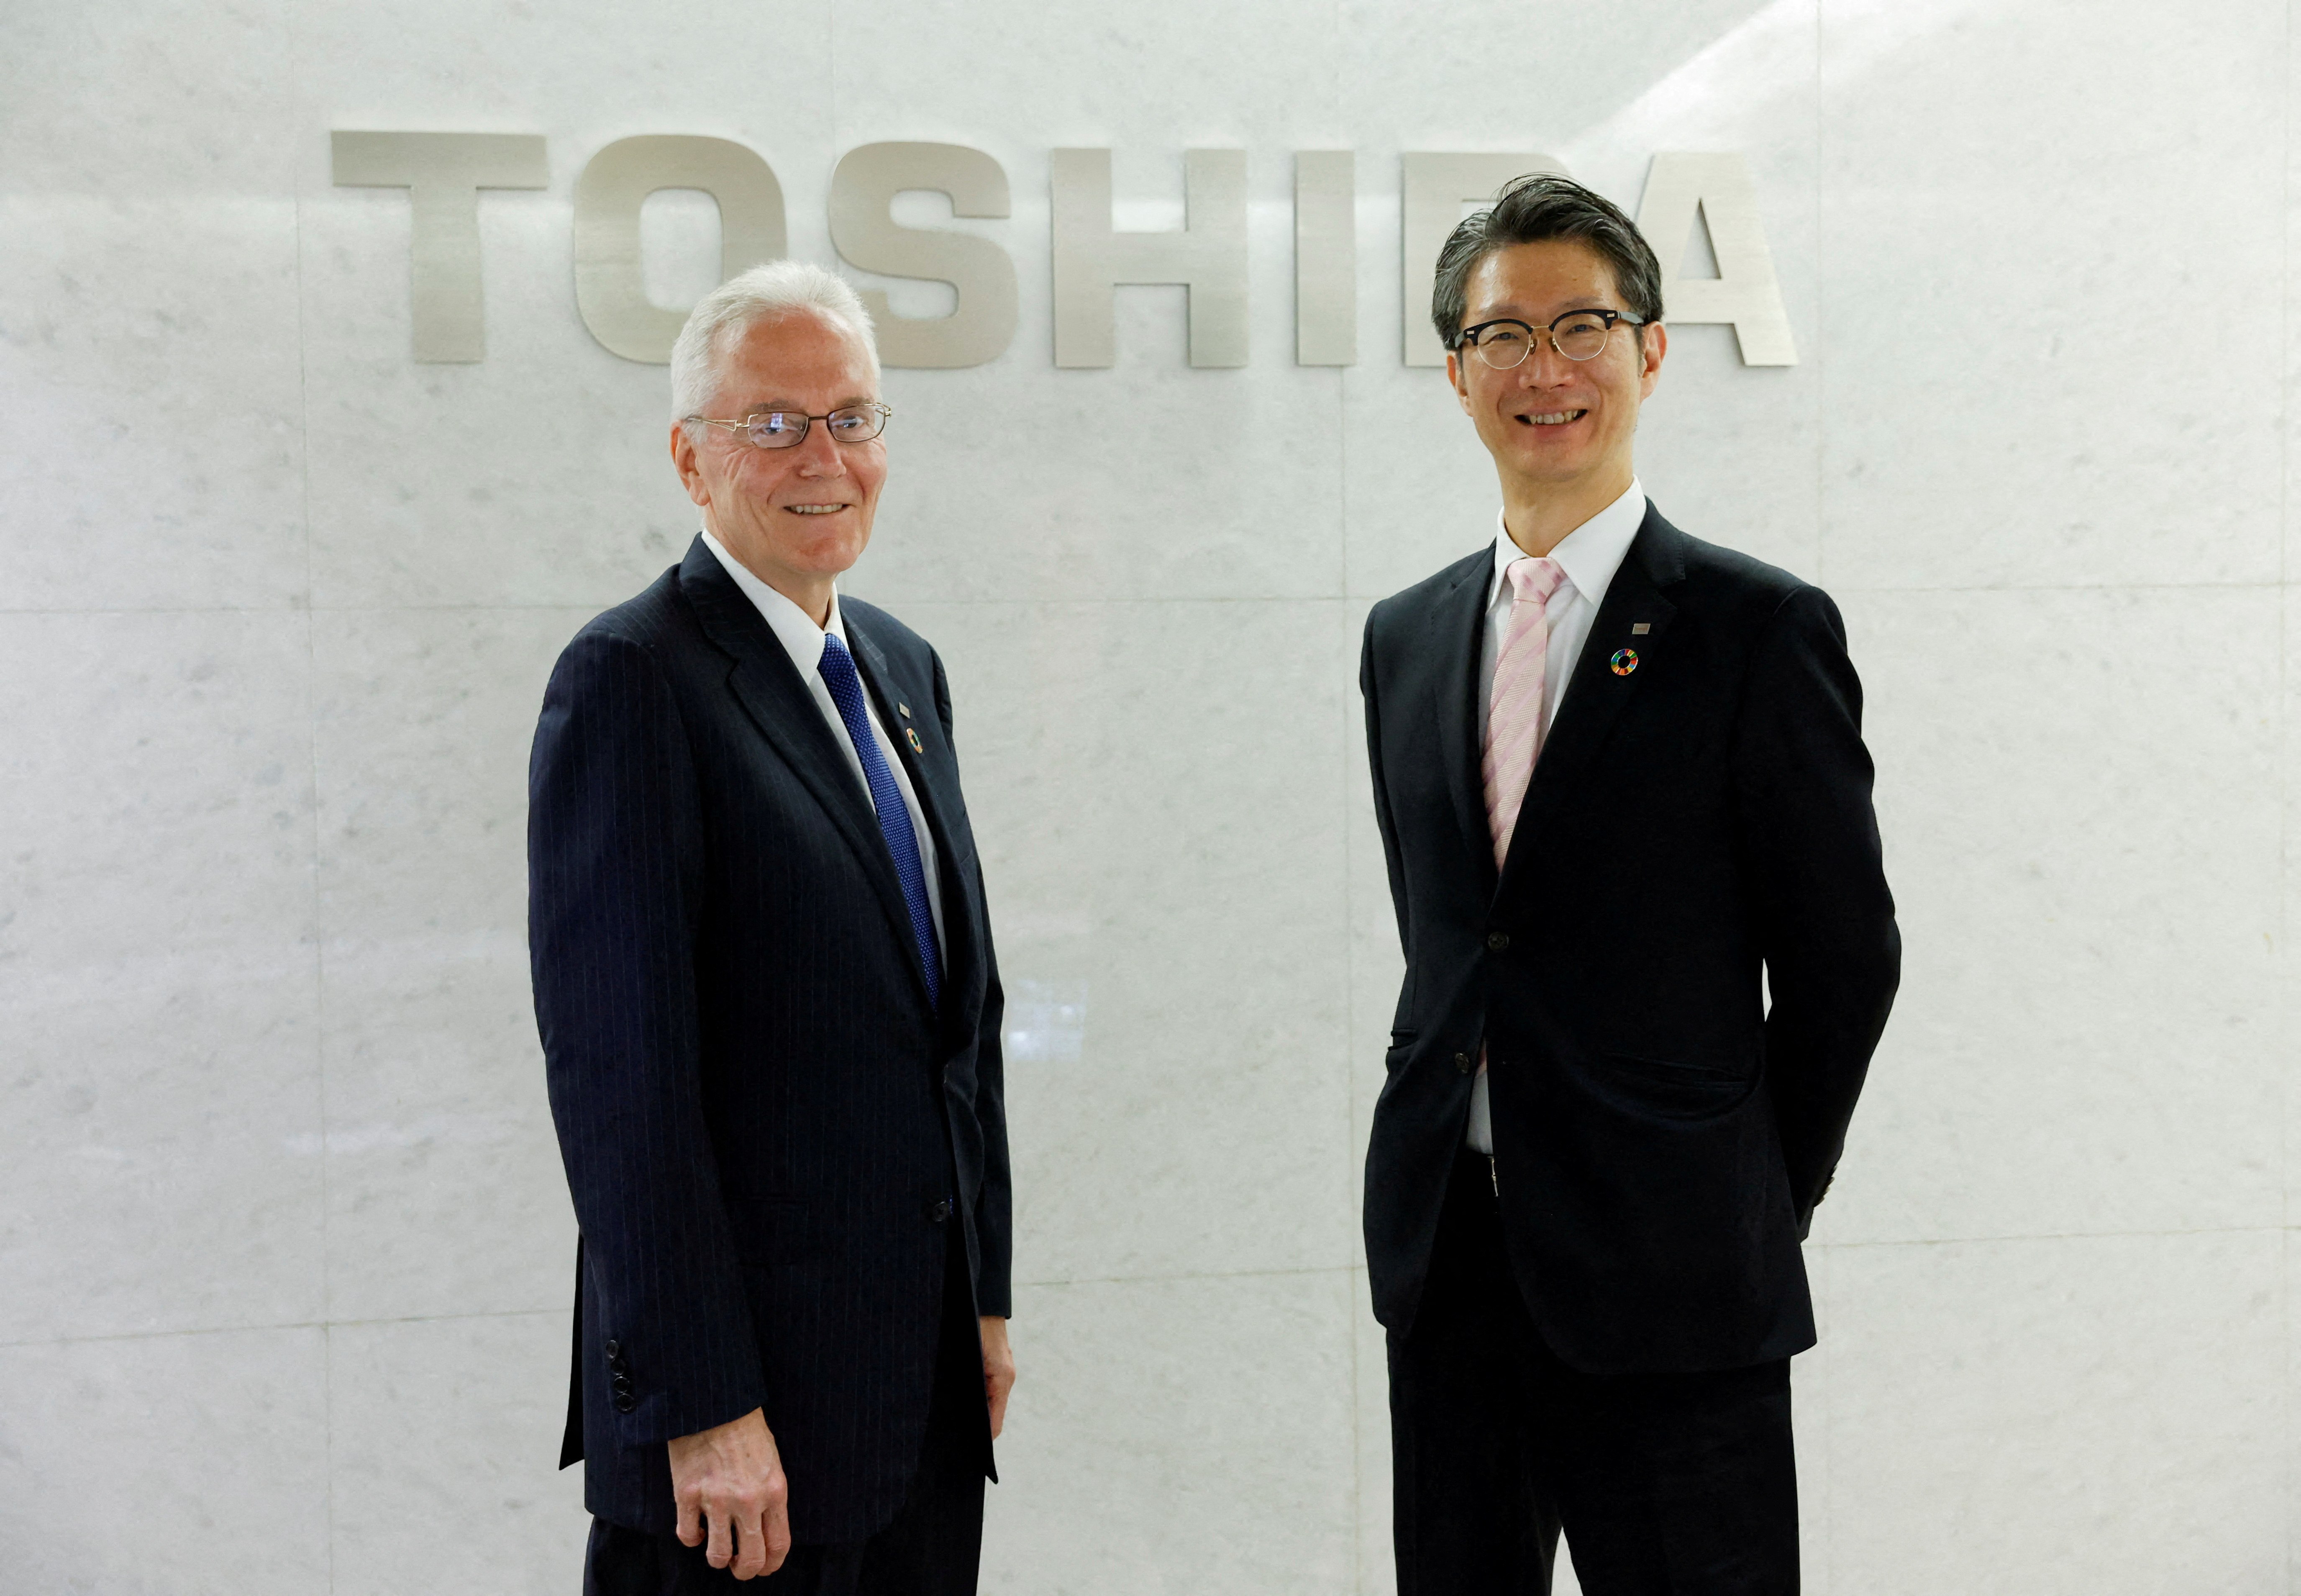 Toshiba Corp. Chief Executive Taro Shimada and external director Jerry Black pose for a photograph during an interview in Tokyo